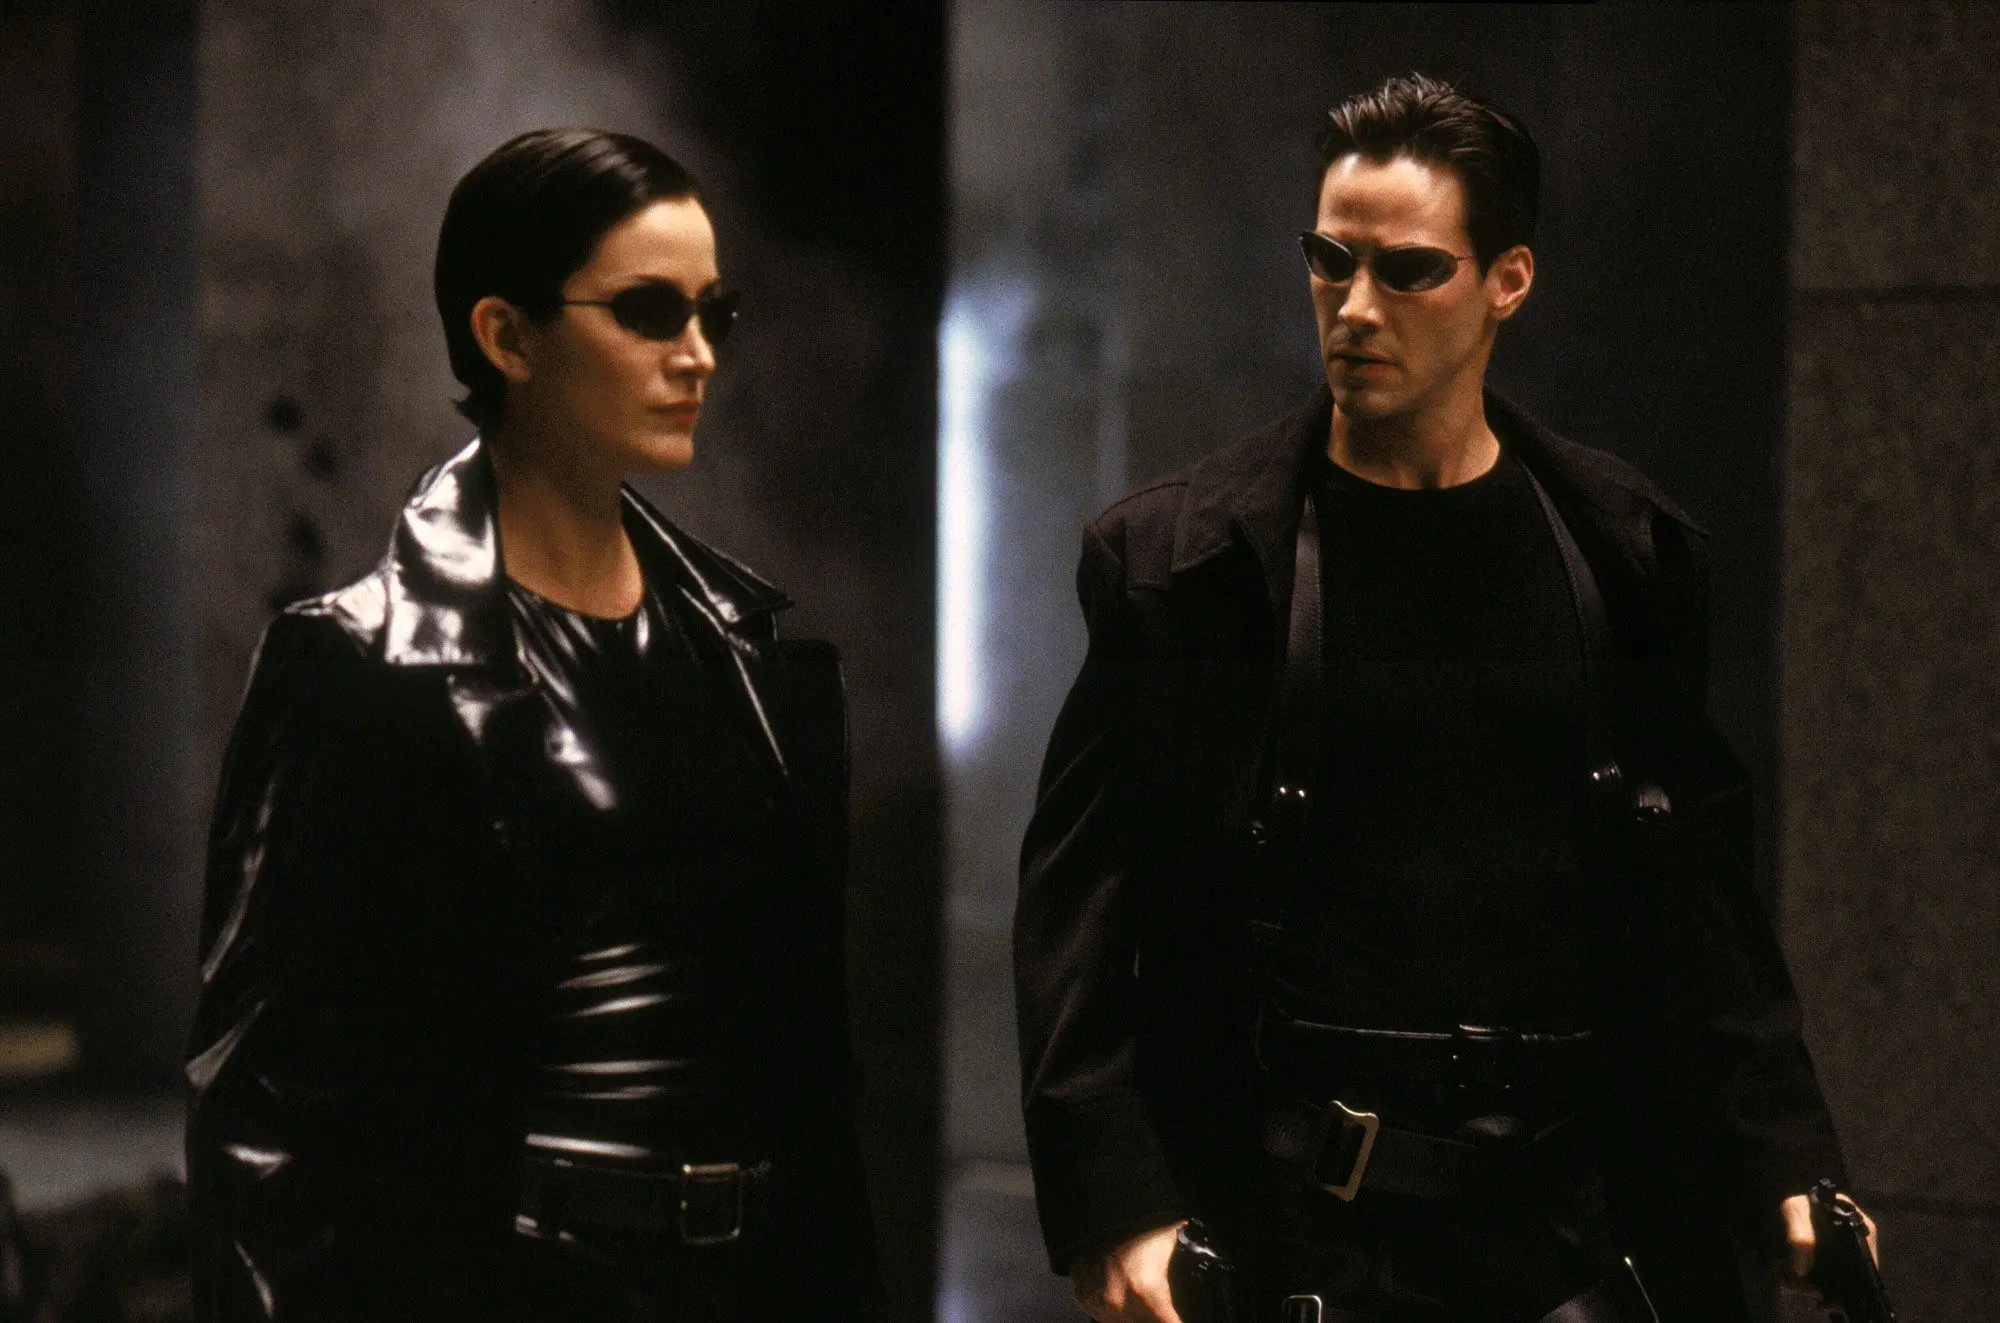 Keanu Reeves as Neo and Carrie-Anne Moss as Trinity